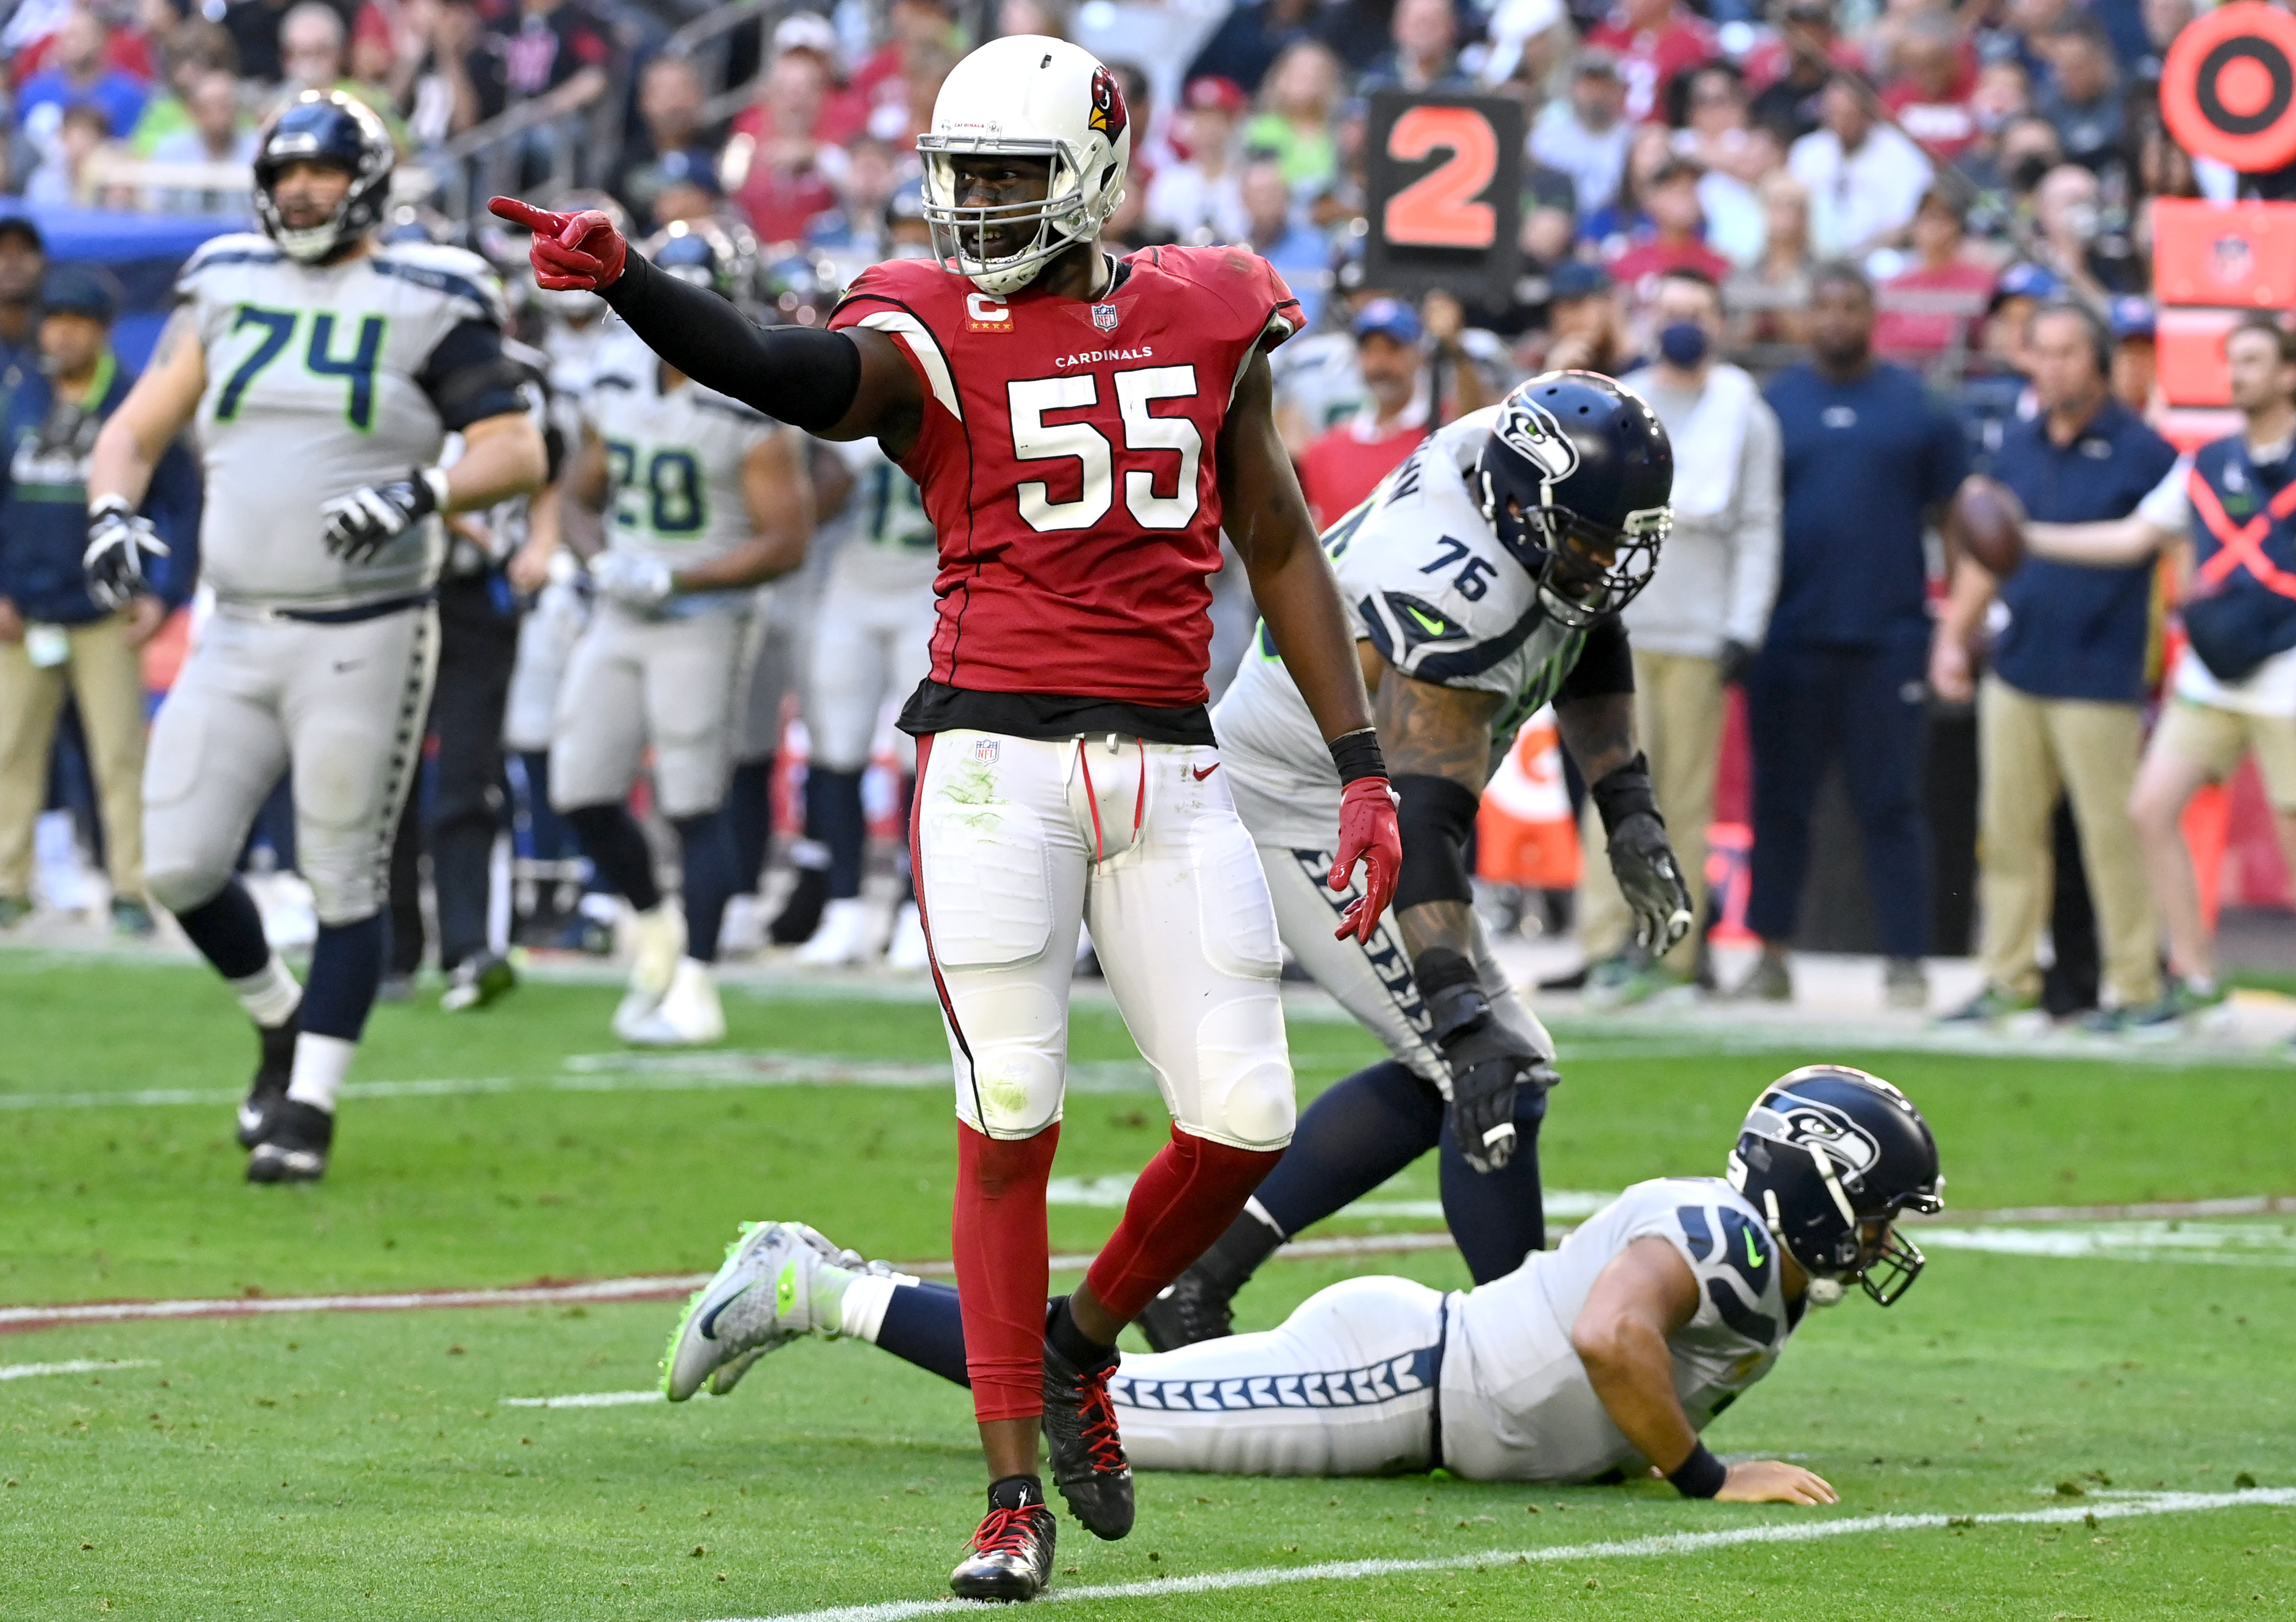 Chandler Jones will be a top free agent target in 2022